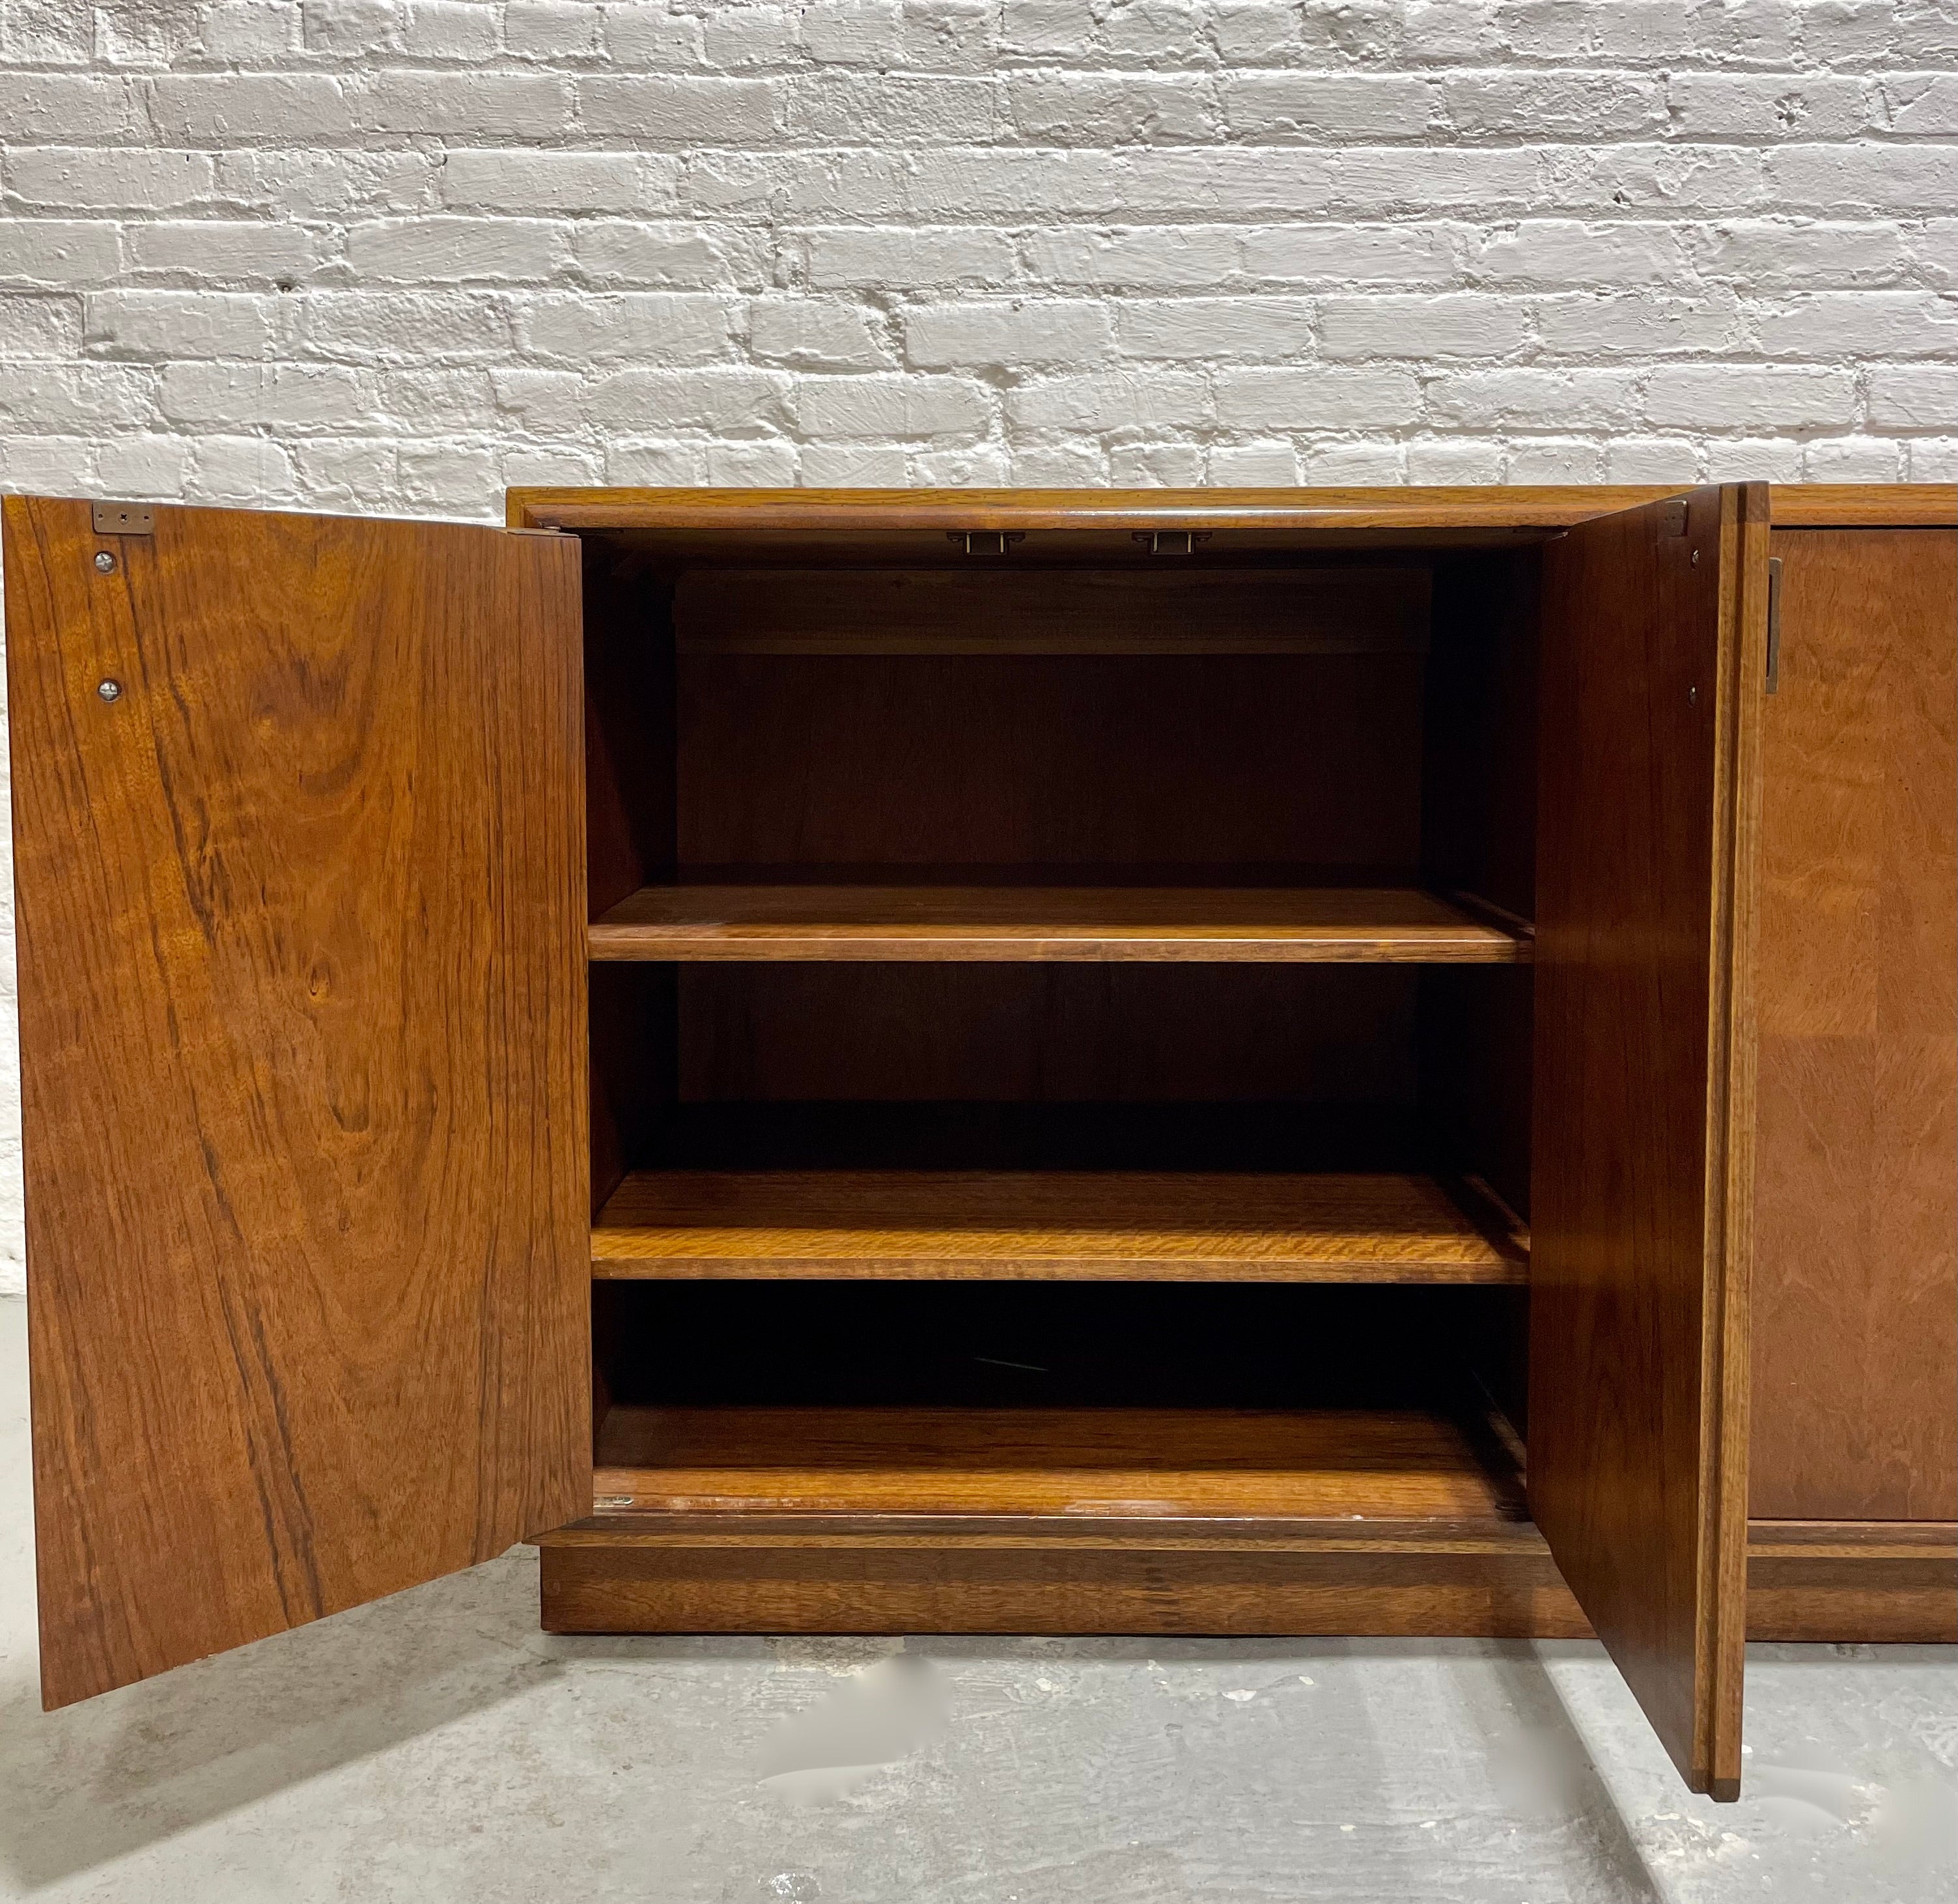 LONG + MAGNIFICENT Mid Century Modern Walnut CREDENZA / Media Stand / Sideboard by Founders